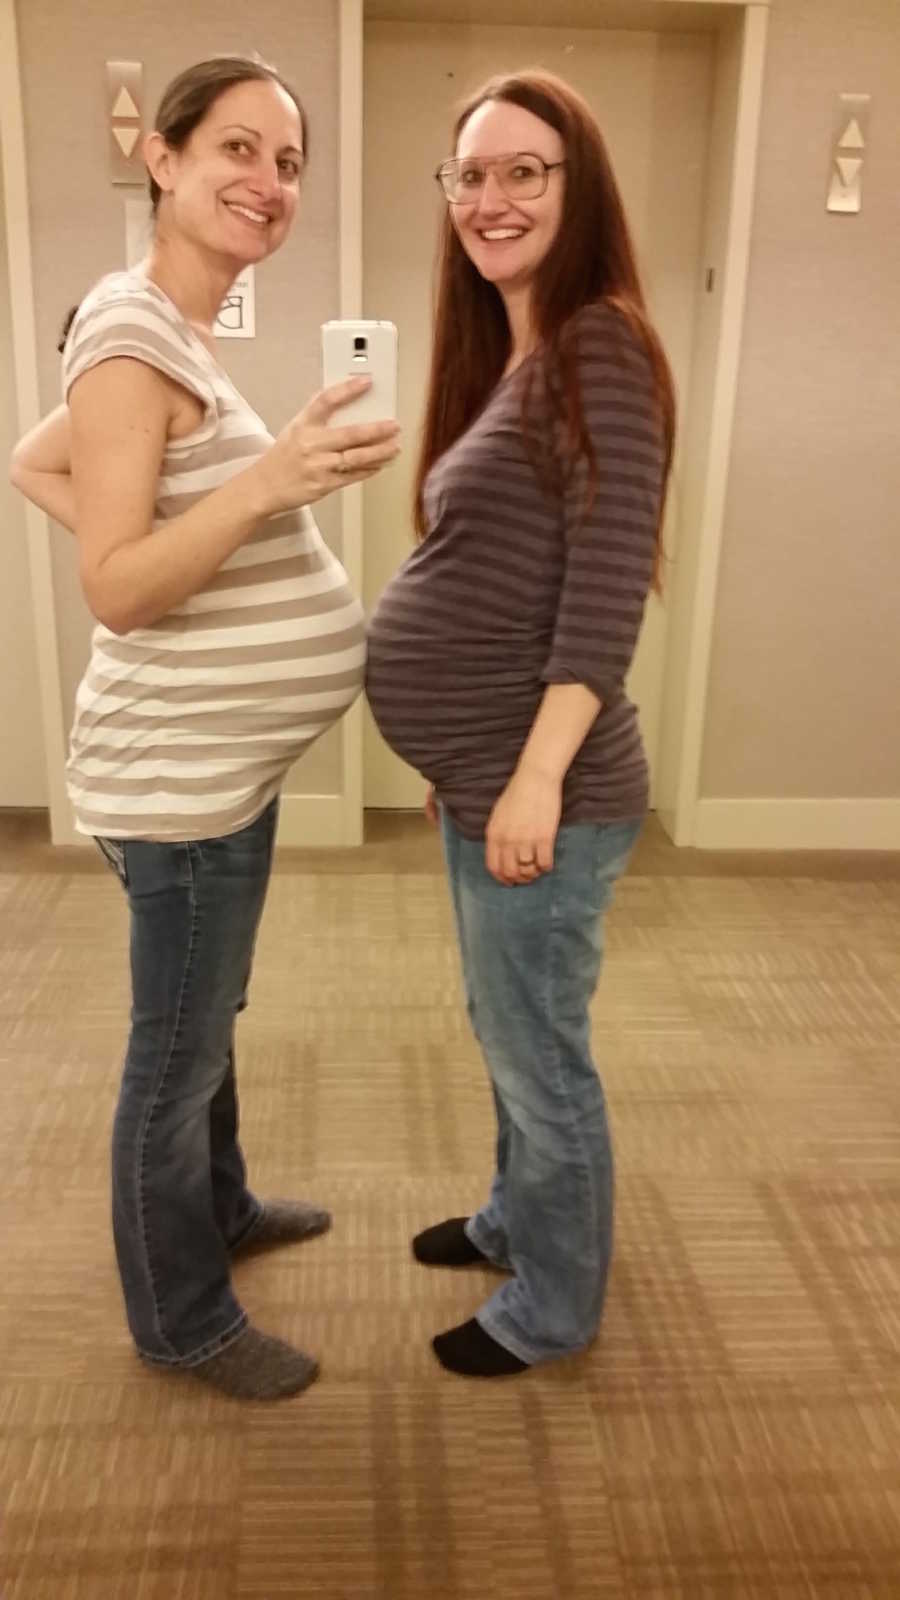 Pregnant woman smiles with stomach touching pregnant friends stomach in mirror selfie